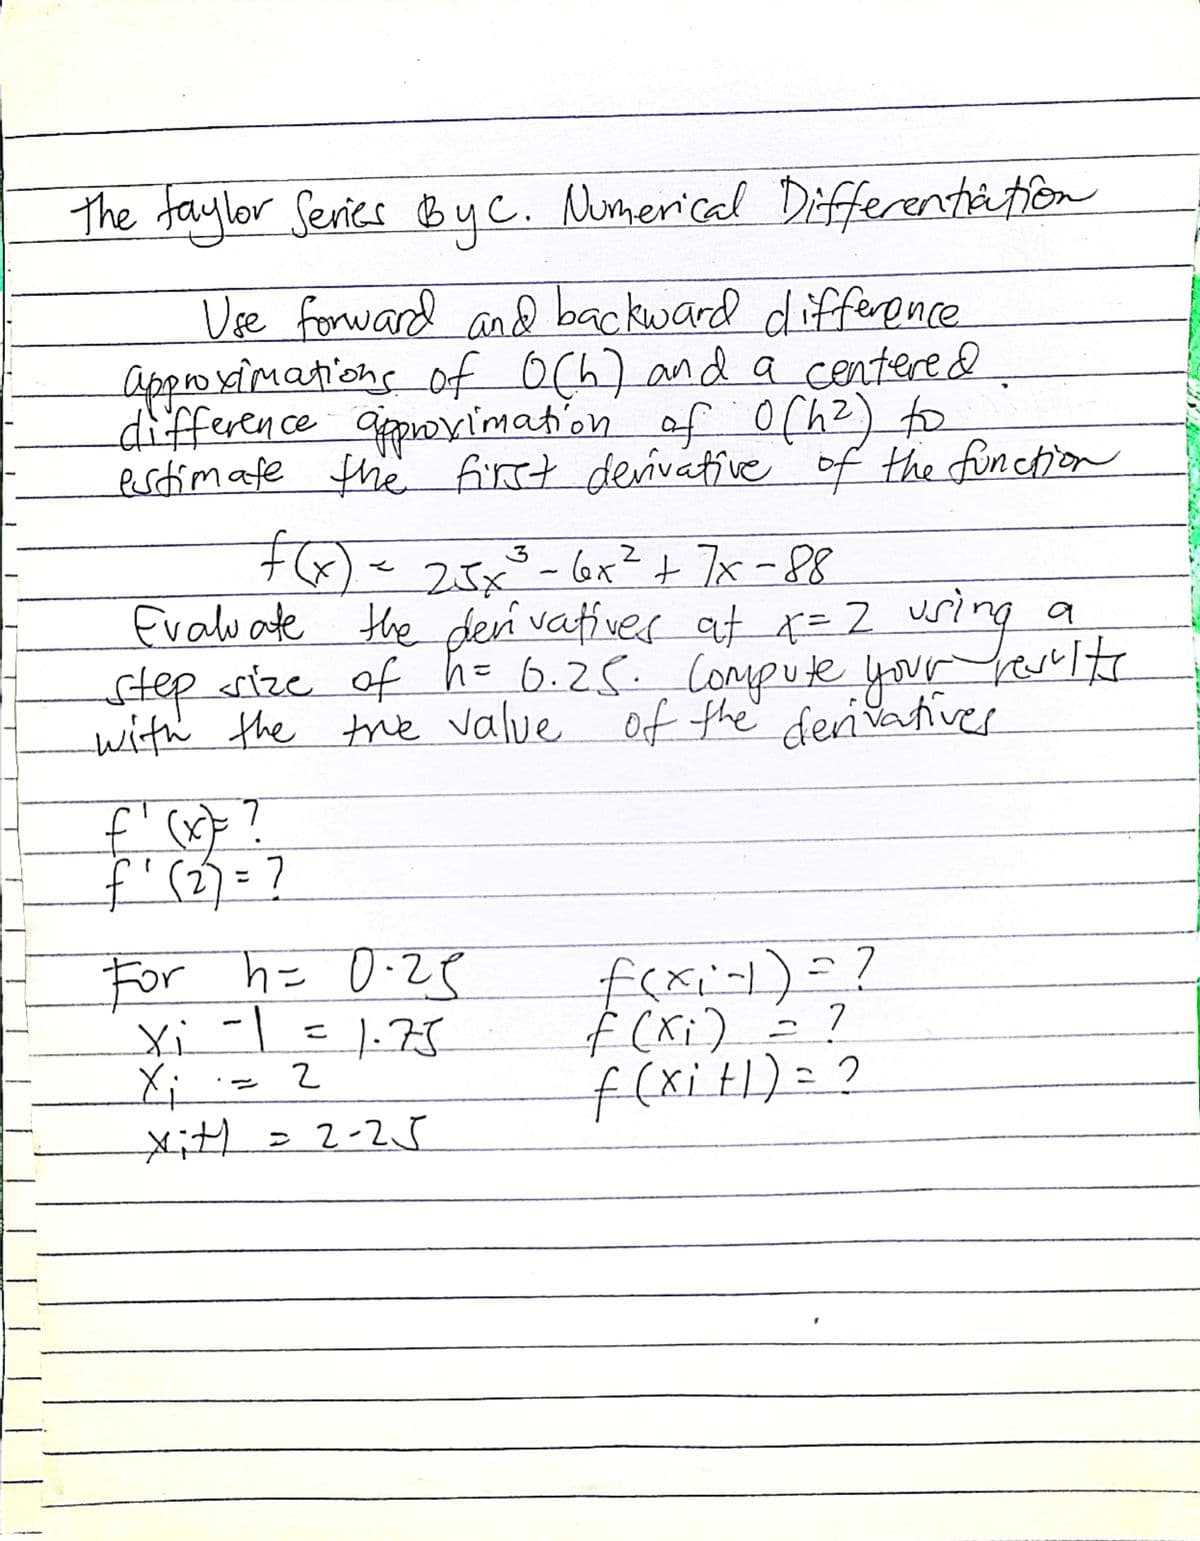 The faylor Series By C. Numerical Differentiation
Use forward and backward difference
approximations of 0(h) and a centered
difference approximation of 0(4²) to
estimate the first derivative of the function
f(x) = 2.5x²³ - 6x² + 7x=88
3
Evaluate the derivatives at x = 2 uring
step size of h = 6.25. Compute your results
with the true value of the derivatives
f'(x)
(X)= ?
f₁ (₂) = ?
2
For h= 0.25
-1
= 1.75
2
Xi
Xi
xit1 = 2-25
f(xi-1) = ?
f (x₁) = ?
f(xit|) = ?